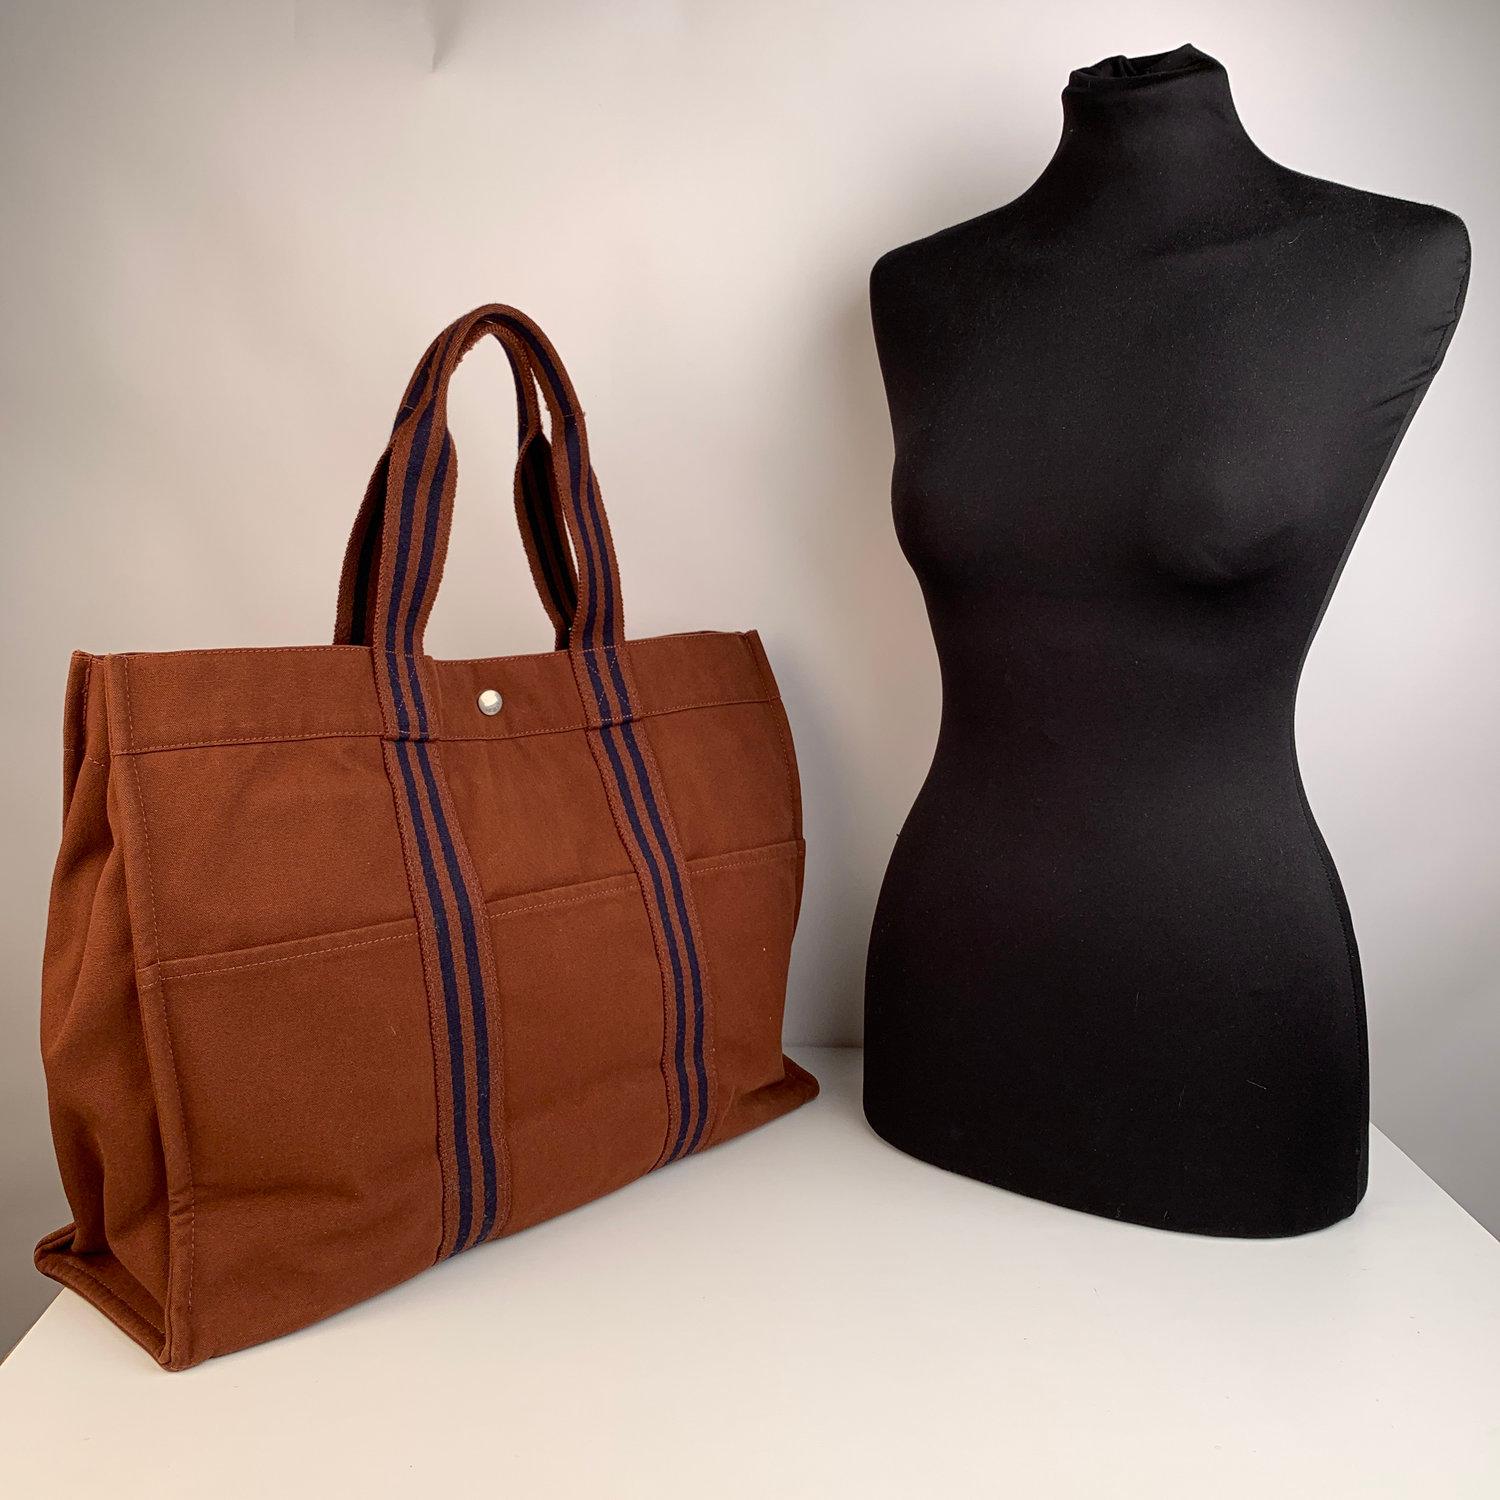 - Hermes Paris Vintage Brown Cotton Canvas Tote Handbag Fourre Tout GM.
- Made in France
- Brown and navy blue colors
- Material: 100% cotton
- 3 front pockets on the front and 3 pockets on the back
- It has snaps on both ends for expansion
-